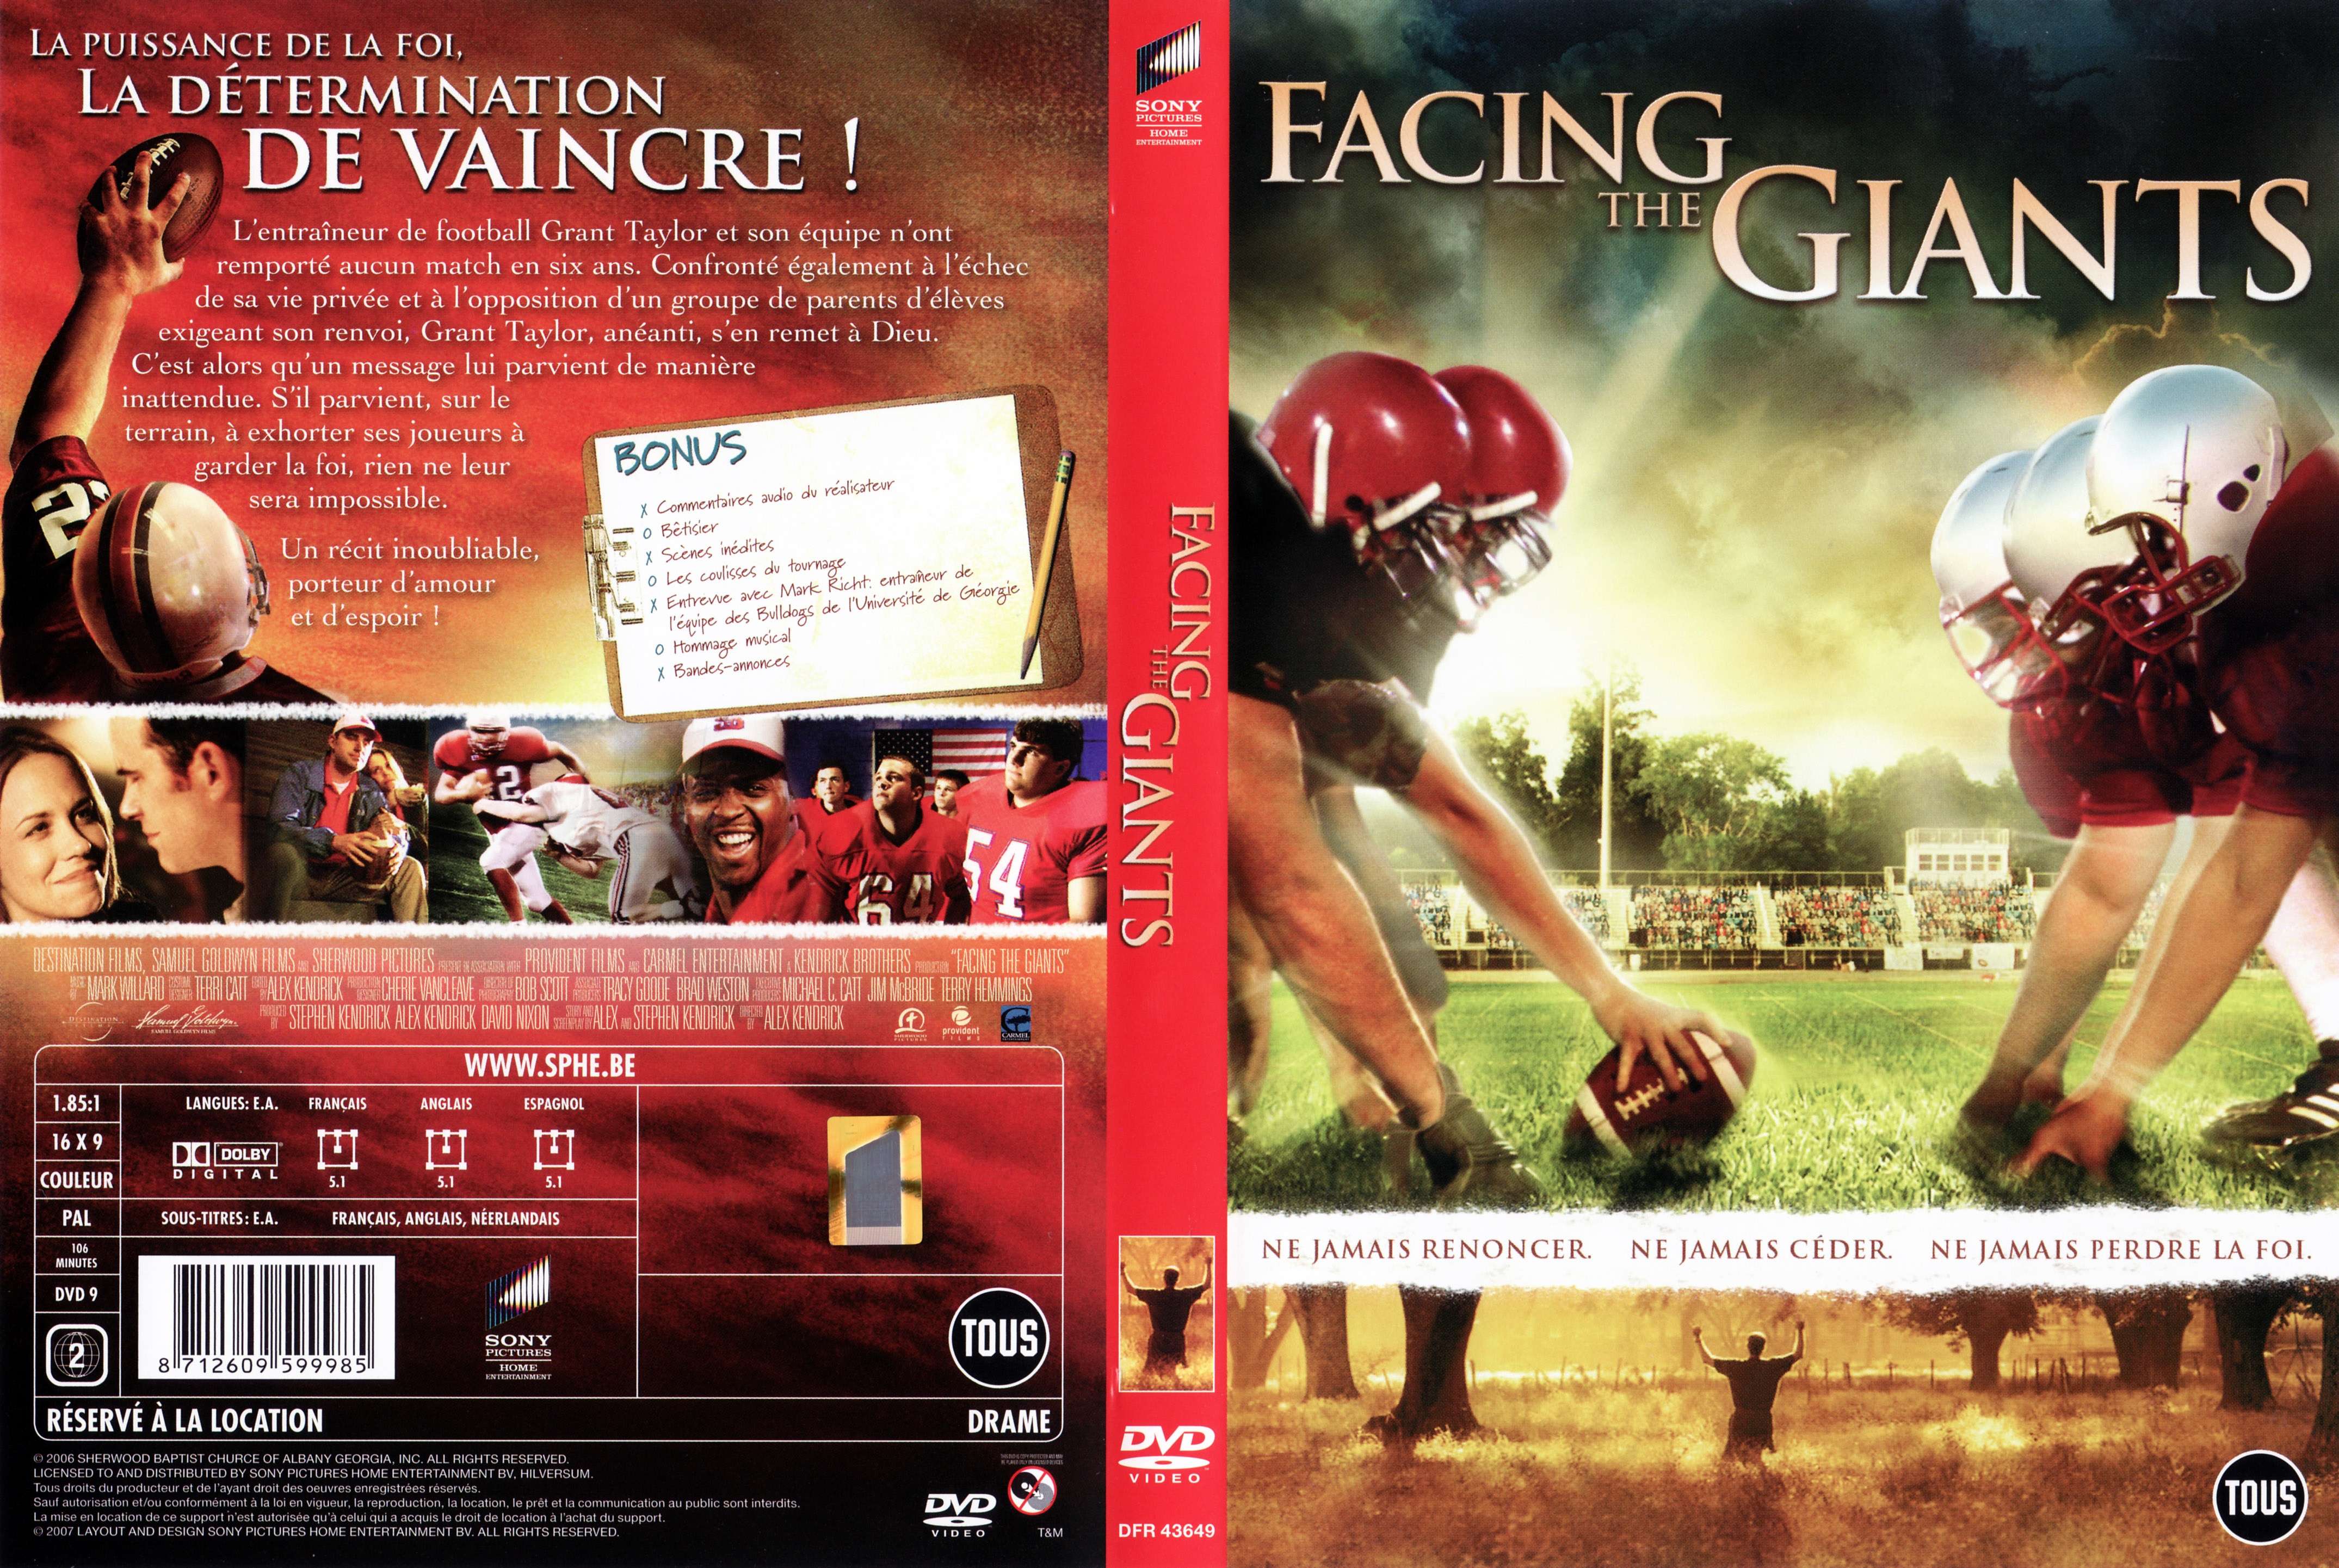 Jaquette DVD Facing the giants